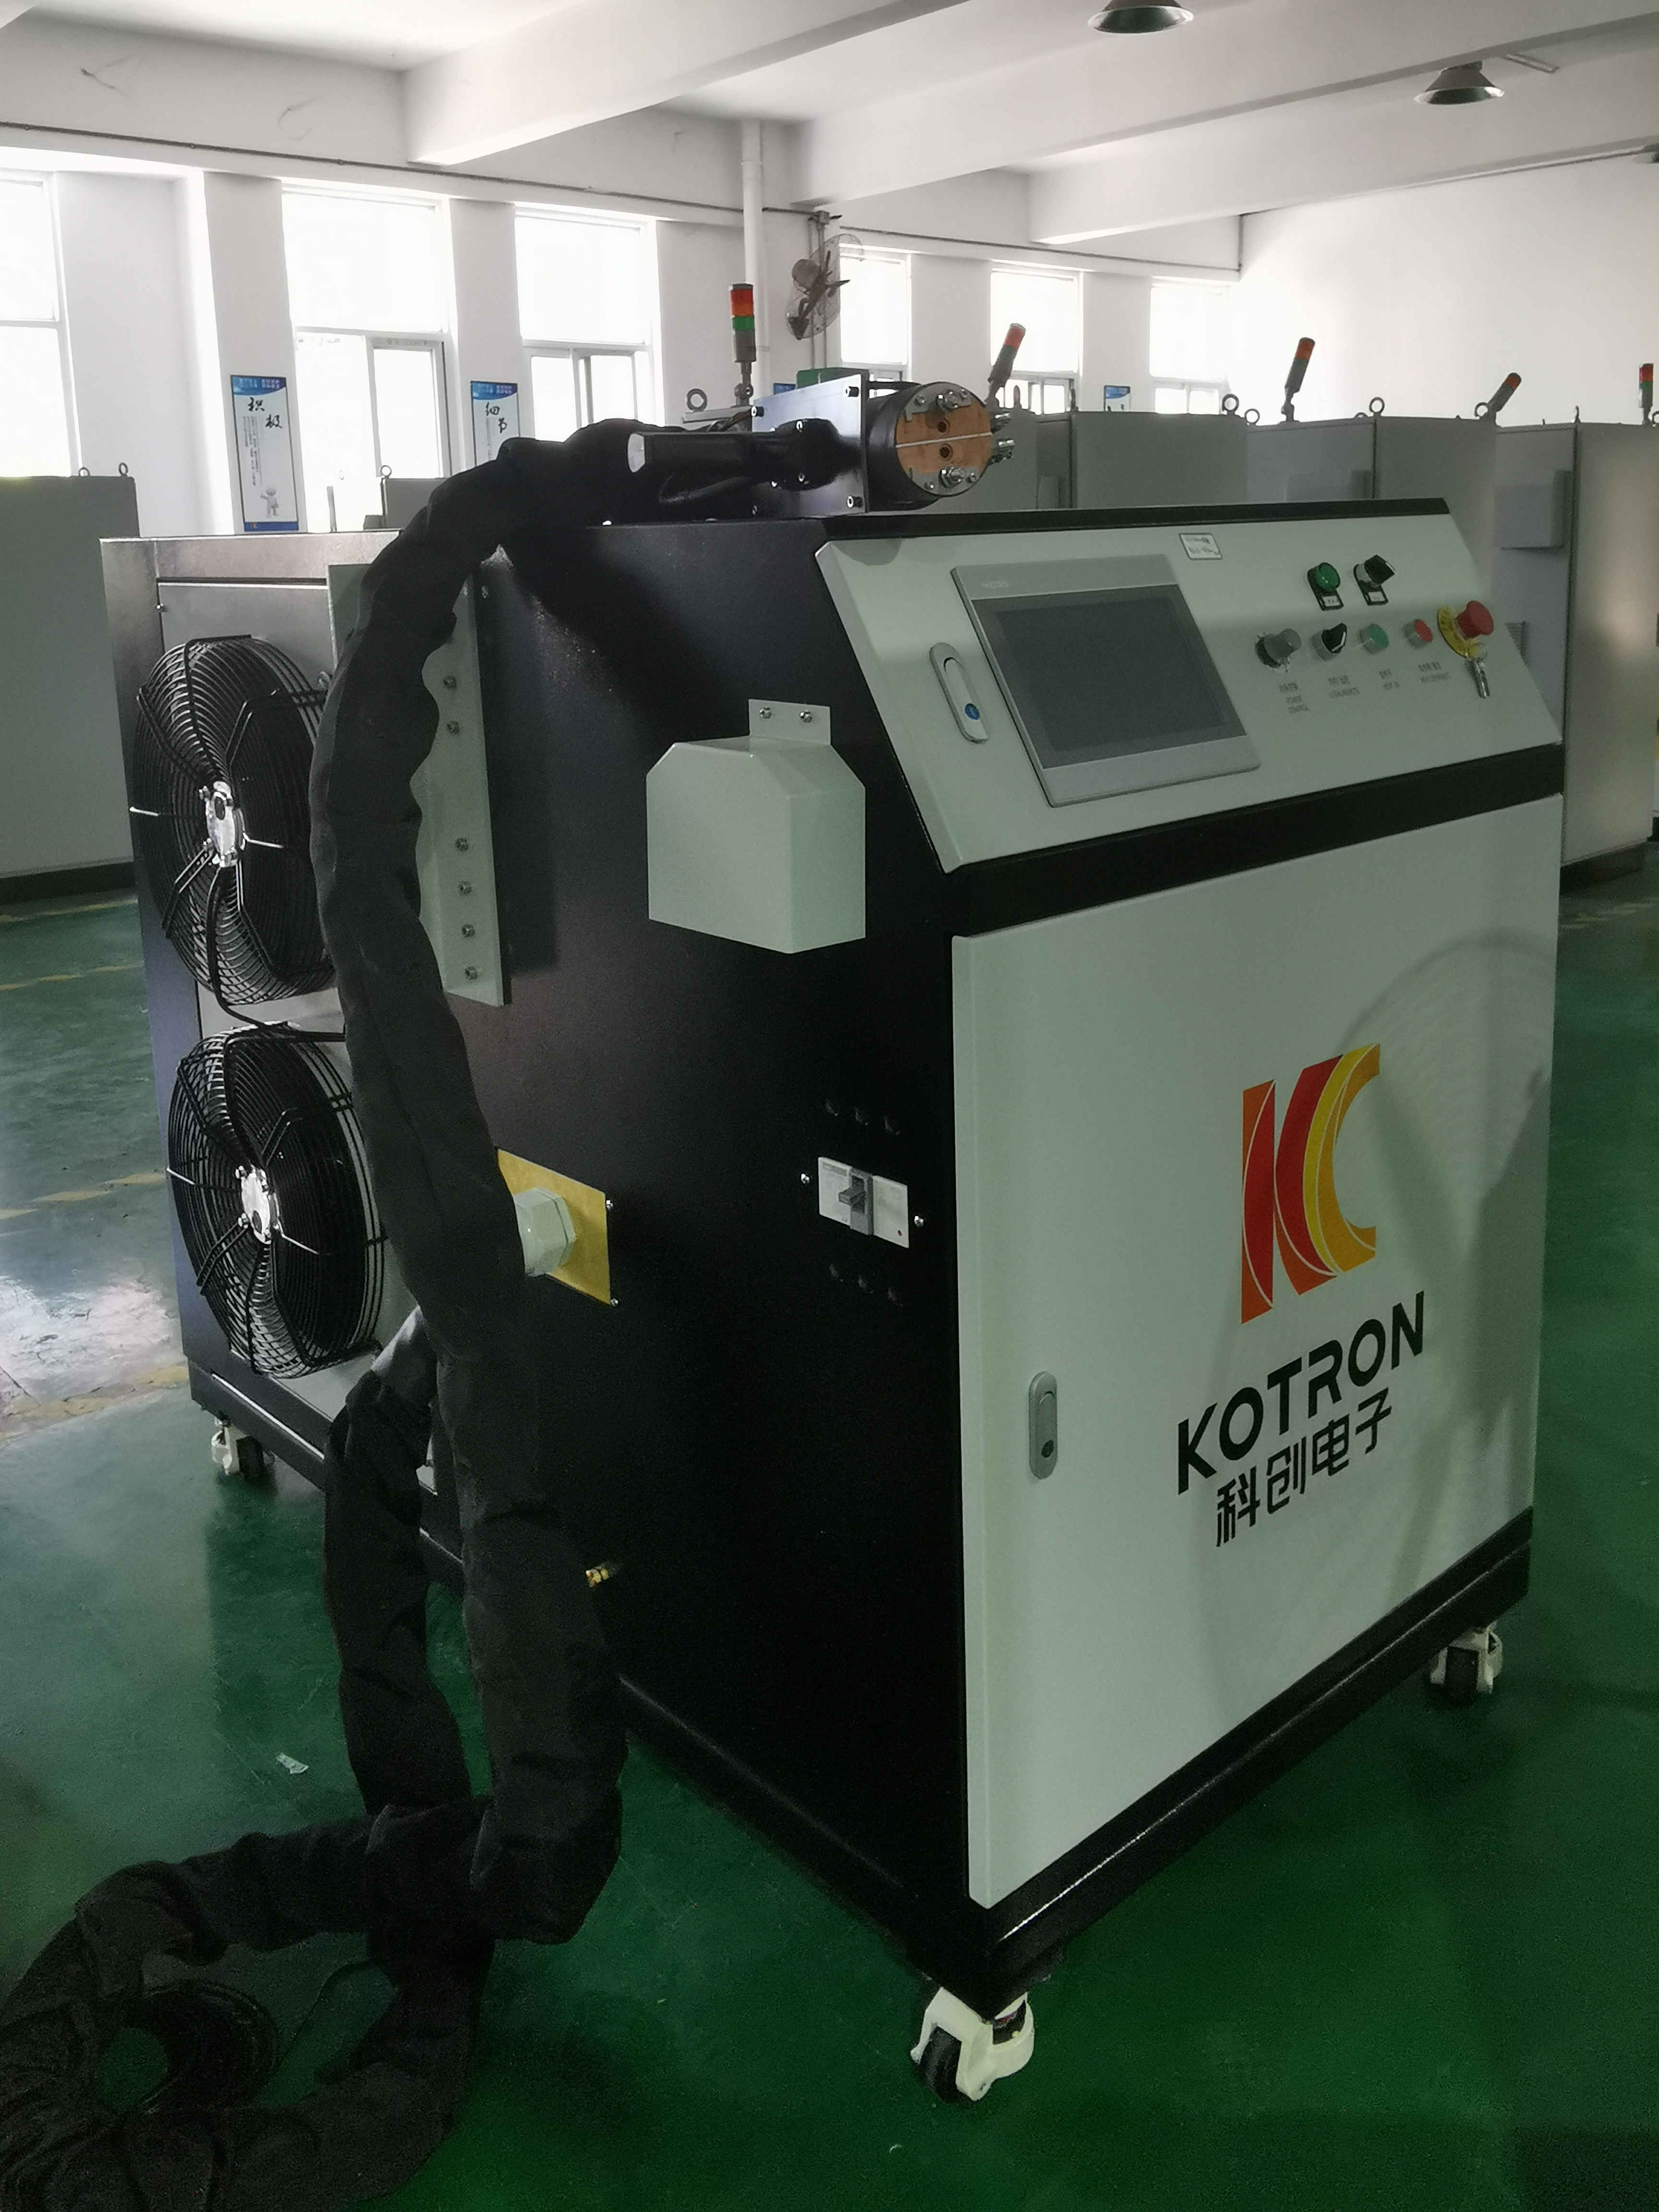 60KW Moveable portable All-in-one Induction Heating machine